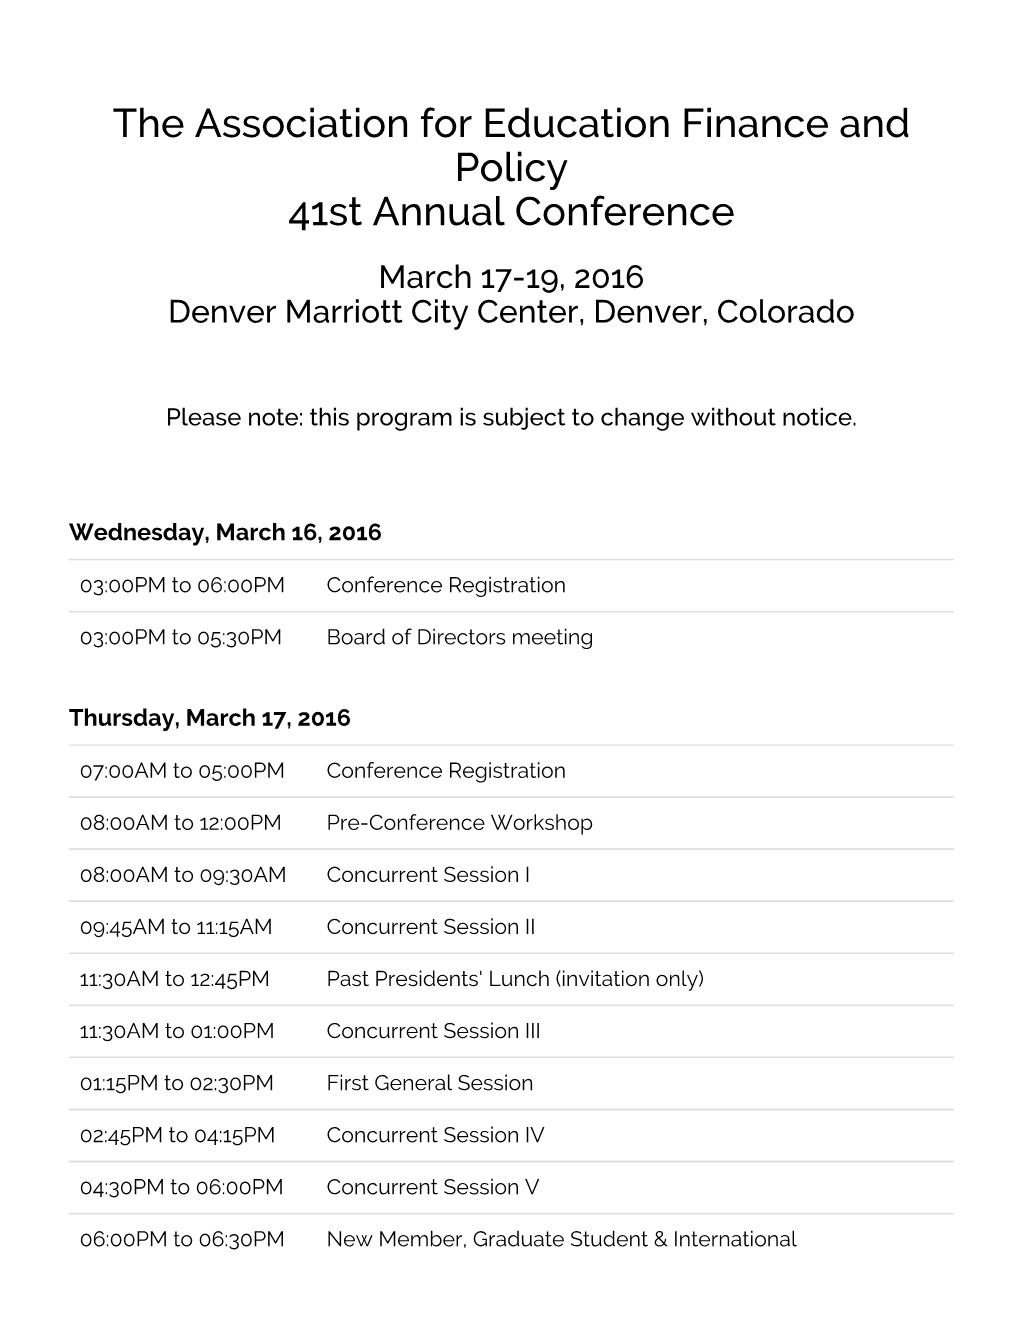 The Association for Education Finance and Policy 41St Annual Conference March 17-19, 2016 Denver Marriott City Center, Denver, Colorado